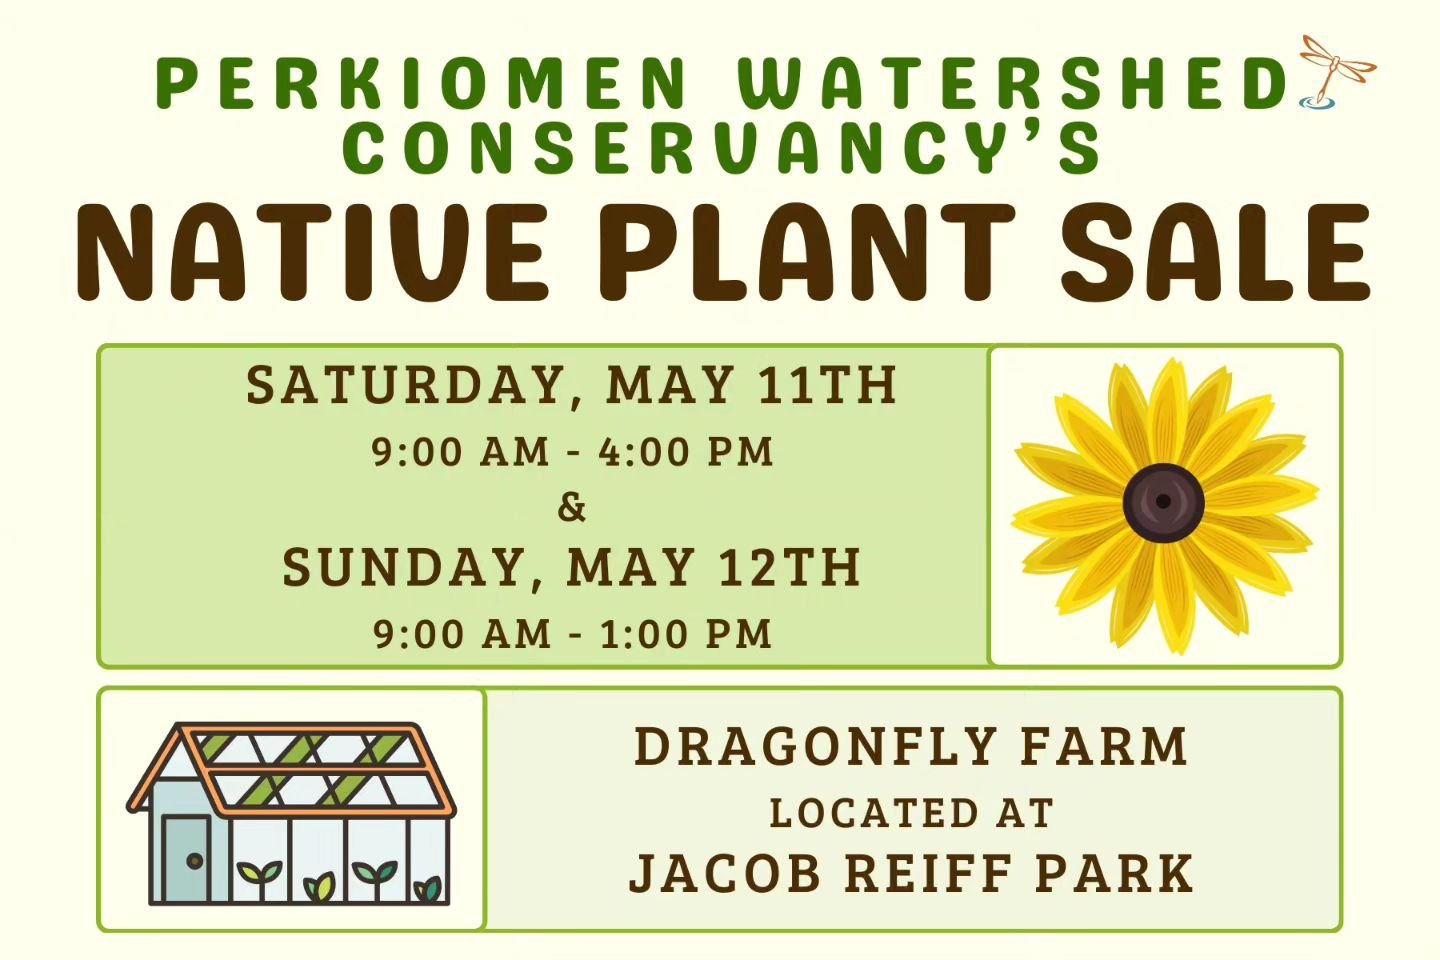 Native Plant Sale online pre-ordering opens on Monday, April 22nd at 8:00 am! Pre-order your favorite species on our website and pick them up from our in-person Native Plant Sale held on Mother's Day Weekend at Dragonfly Farm located at Jacob Reiff P